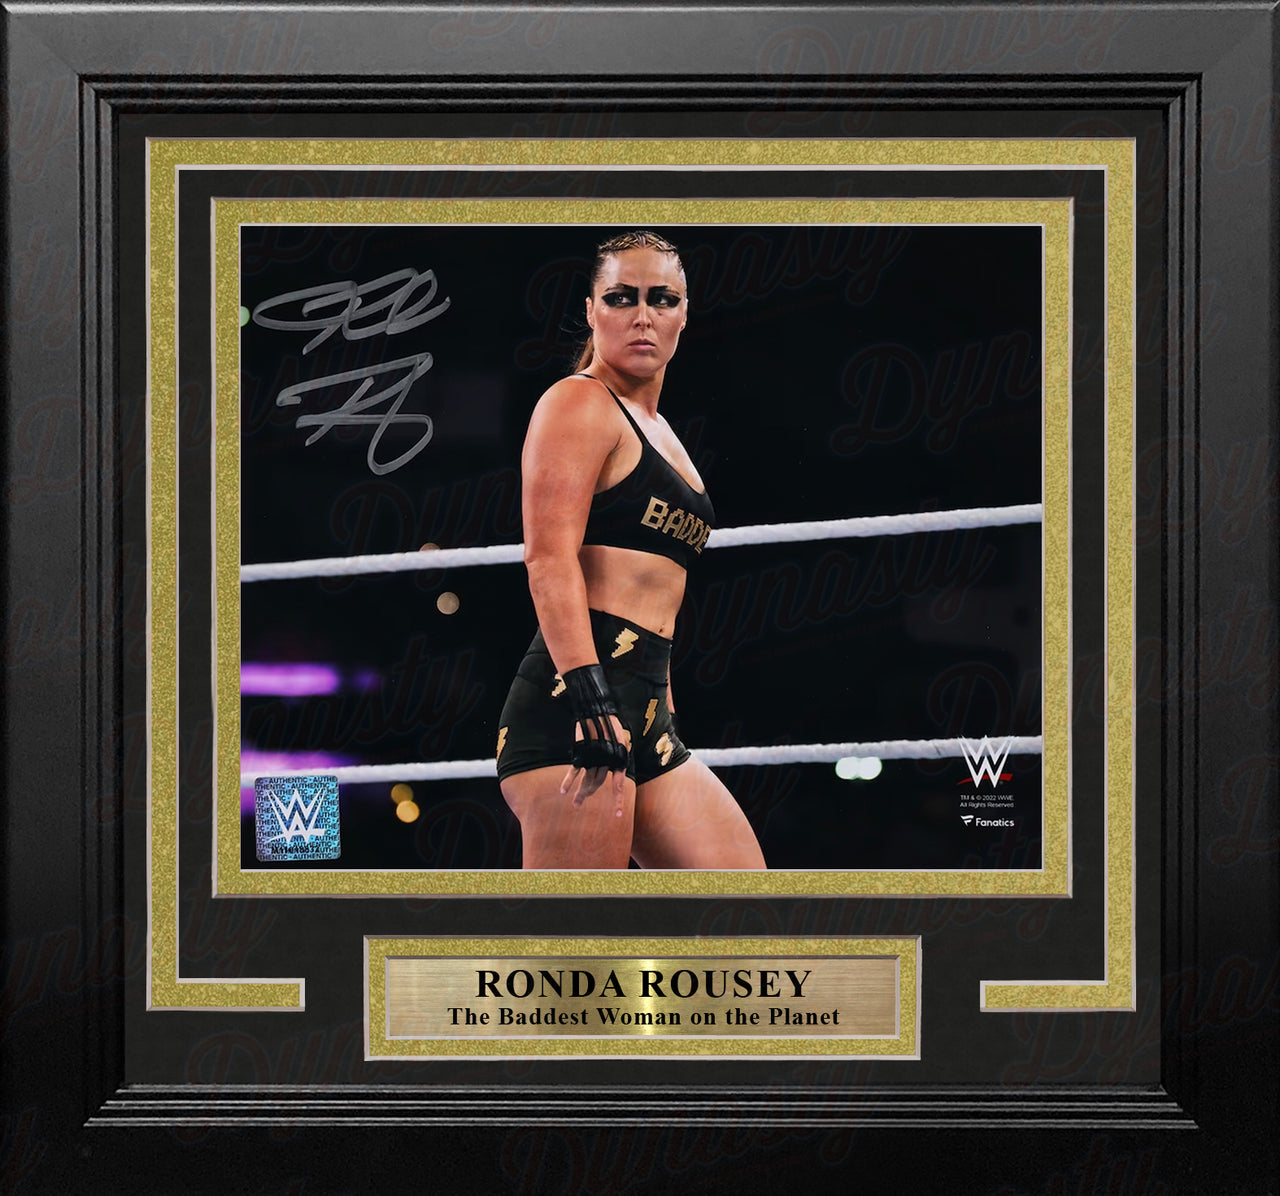 Ronda Rousey Waits in the Ring Autographed 8" x 10" Framed WWE Wrestling Photo - Dynasty Sports & Framing 